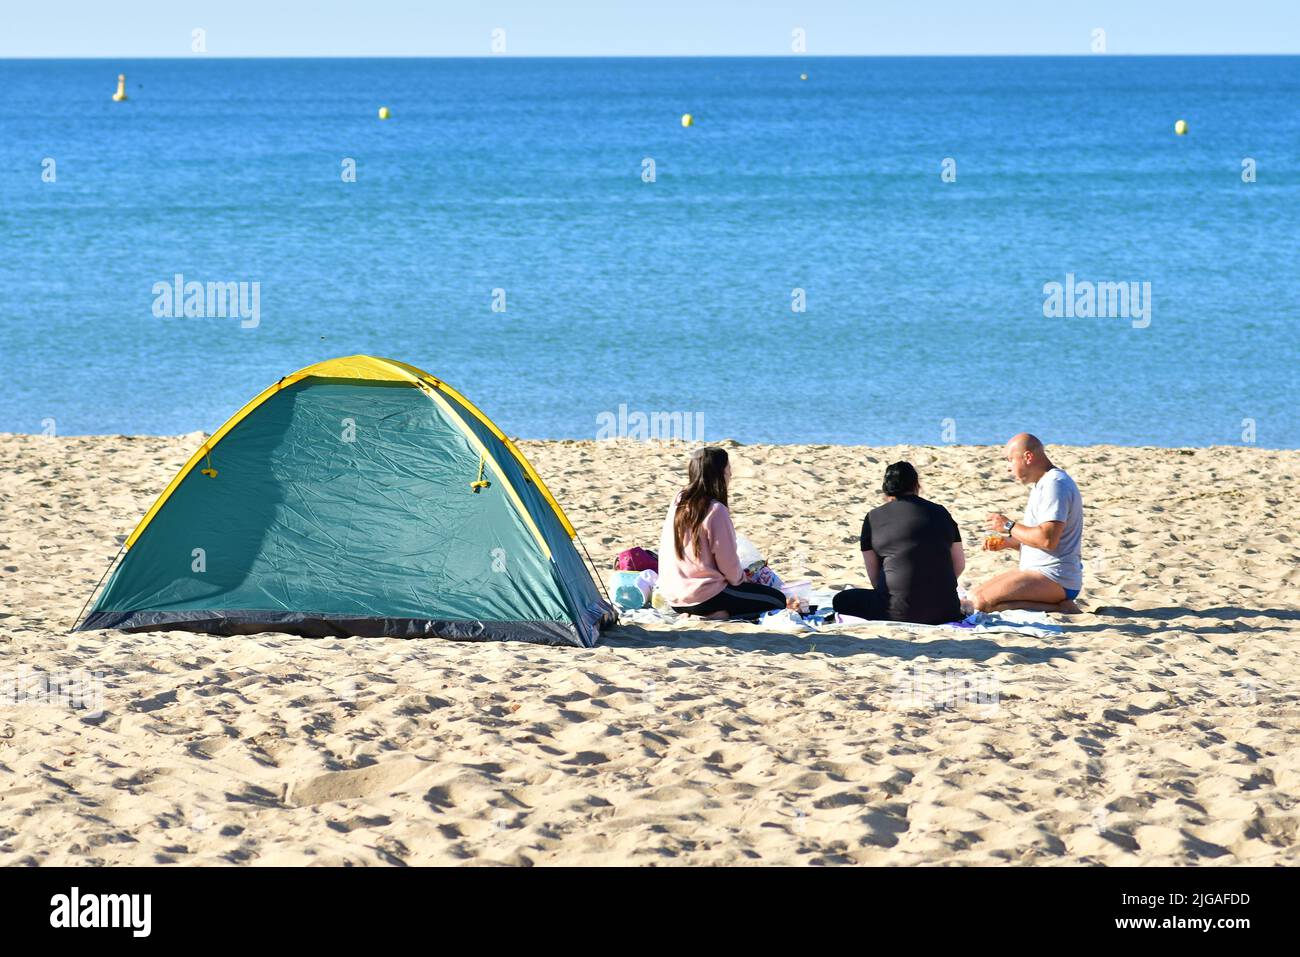 Boscombe, Bournemouth, Dorset, England, UK, 9th July 2022, Weather. Heatwave in mid-summer. People arrive at the beach before 8 am on Saturday morning. Temperatures will reach the high 20s by afternoon in wall-to-wall sunshine. People sitting on the beach with a tent. Credit: Paul Biggins/Alamy Live News Stock Photo